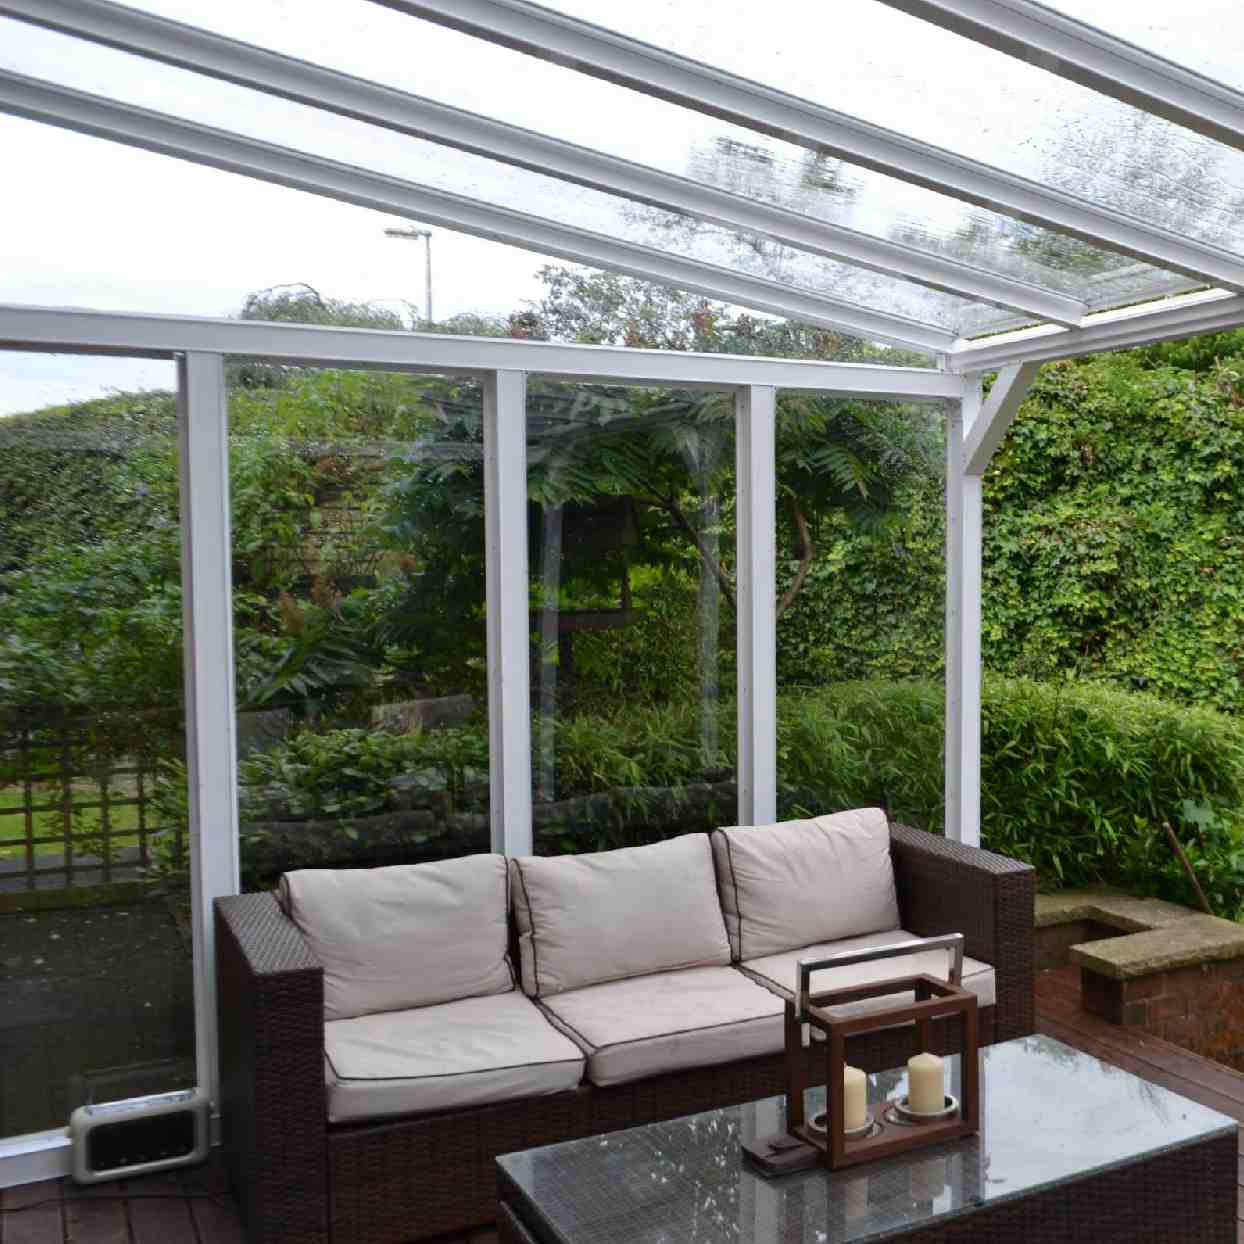 Buy Omega Verandah White with 6mm Glass Clear Plate Polycarbonate Glazing - 7.0m (W) x 2.5m (P), (4) Supporting Posts online today